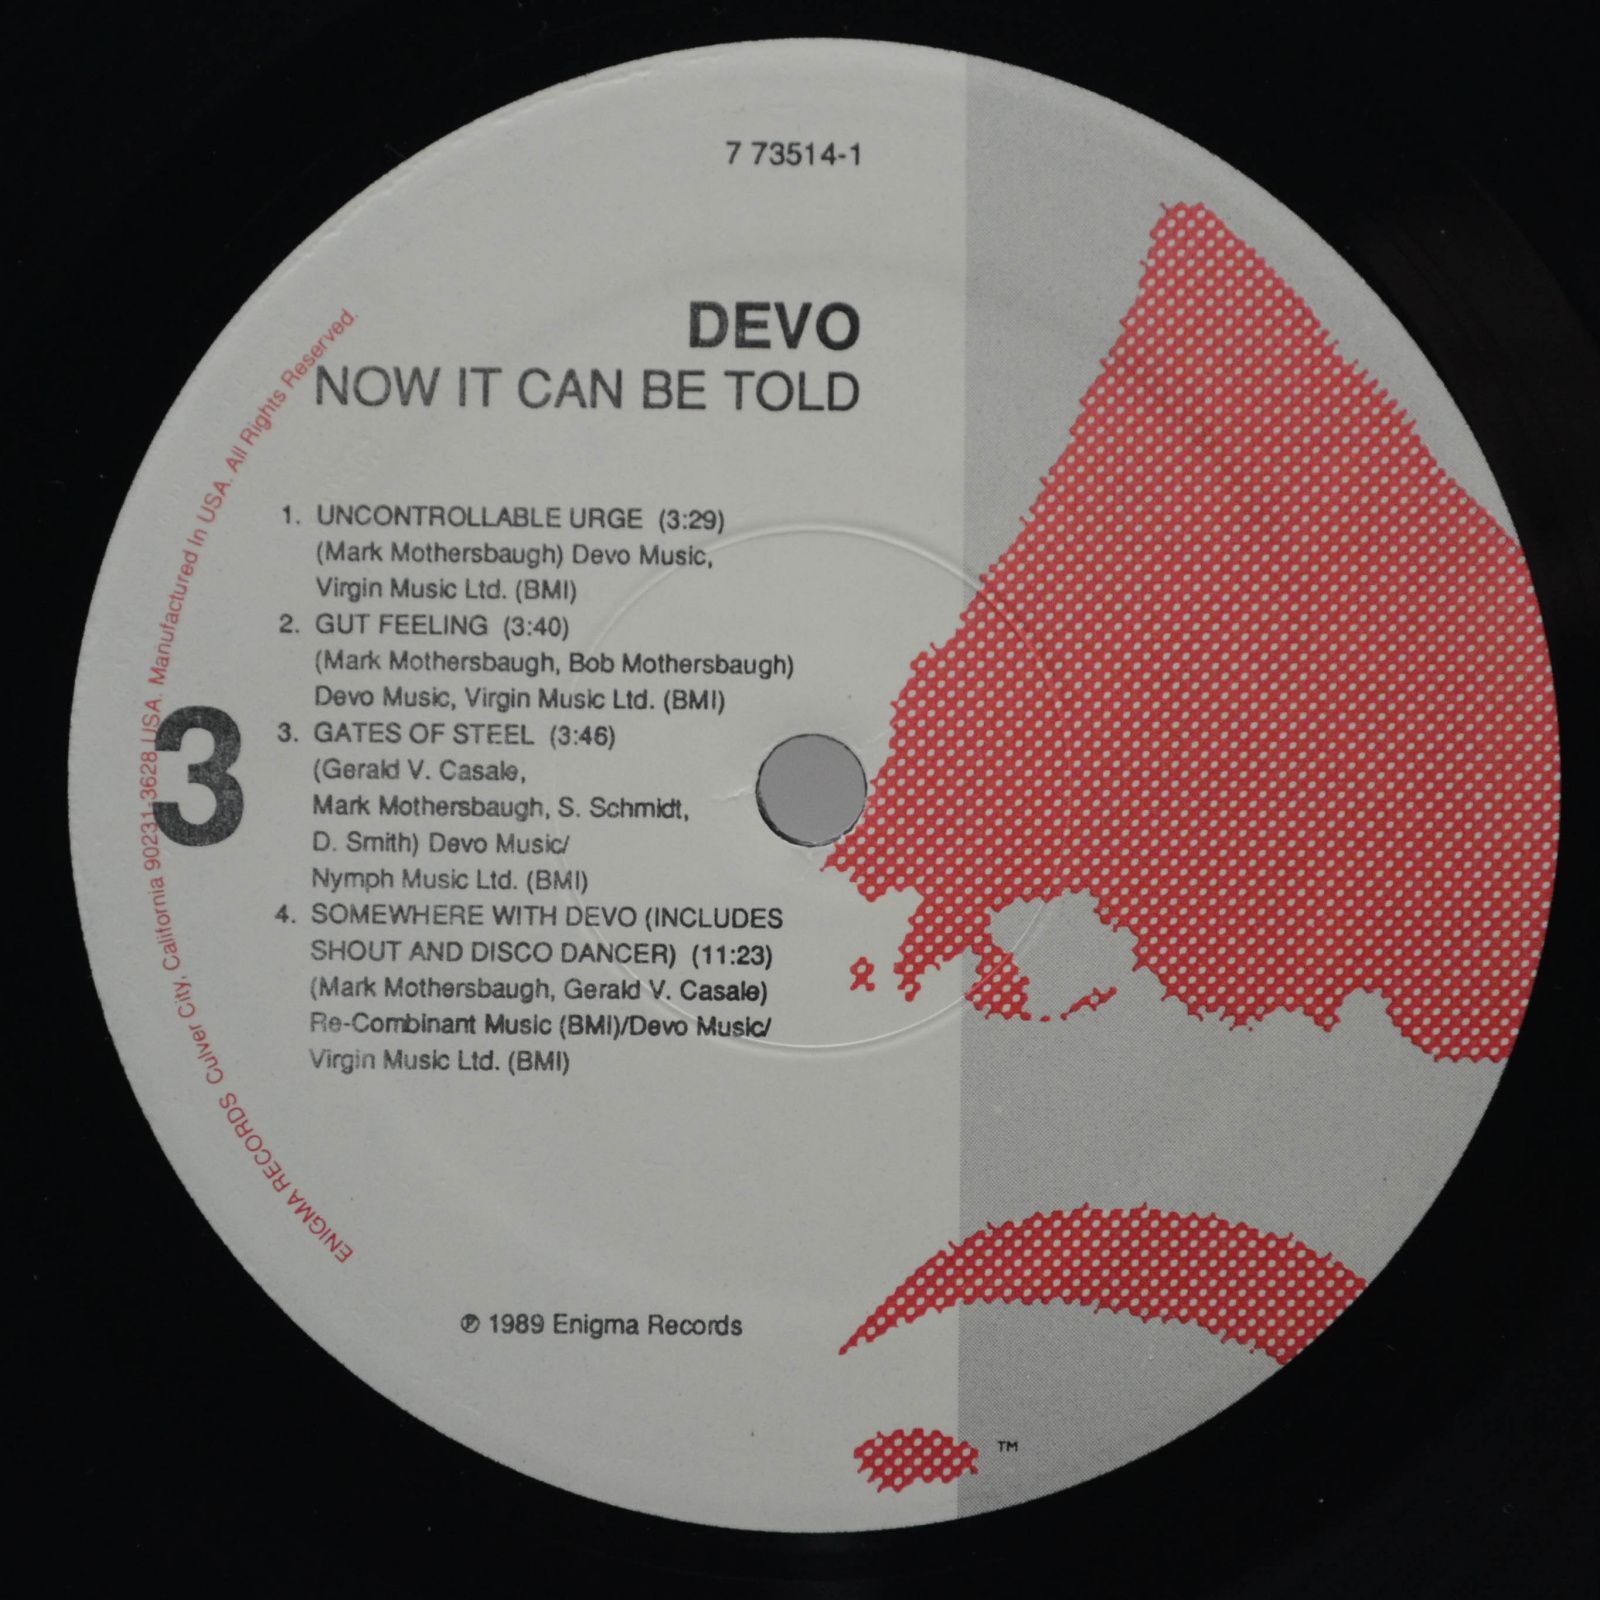 Devo — Now It Can Be Told (Devo At The Palace 12/9/88) (2LP, USA), 1989